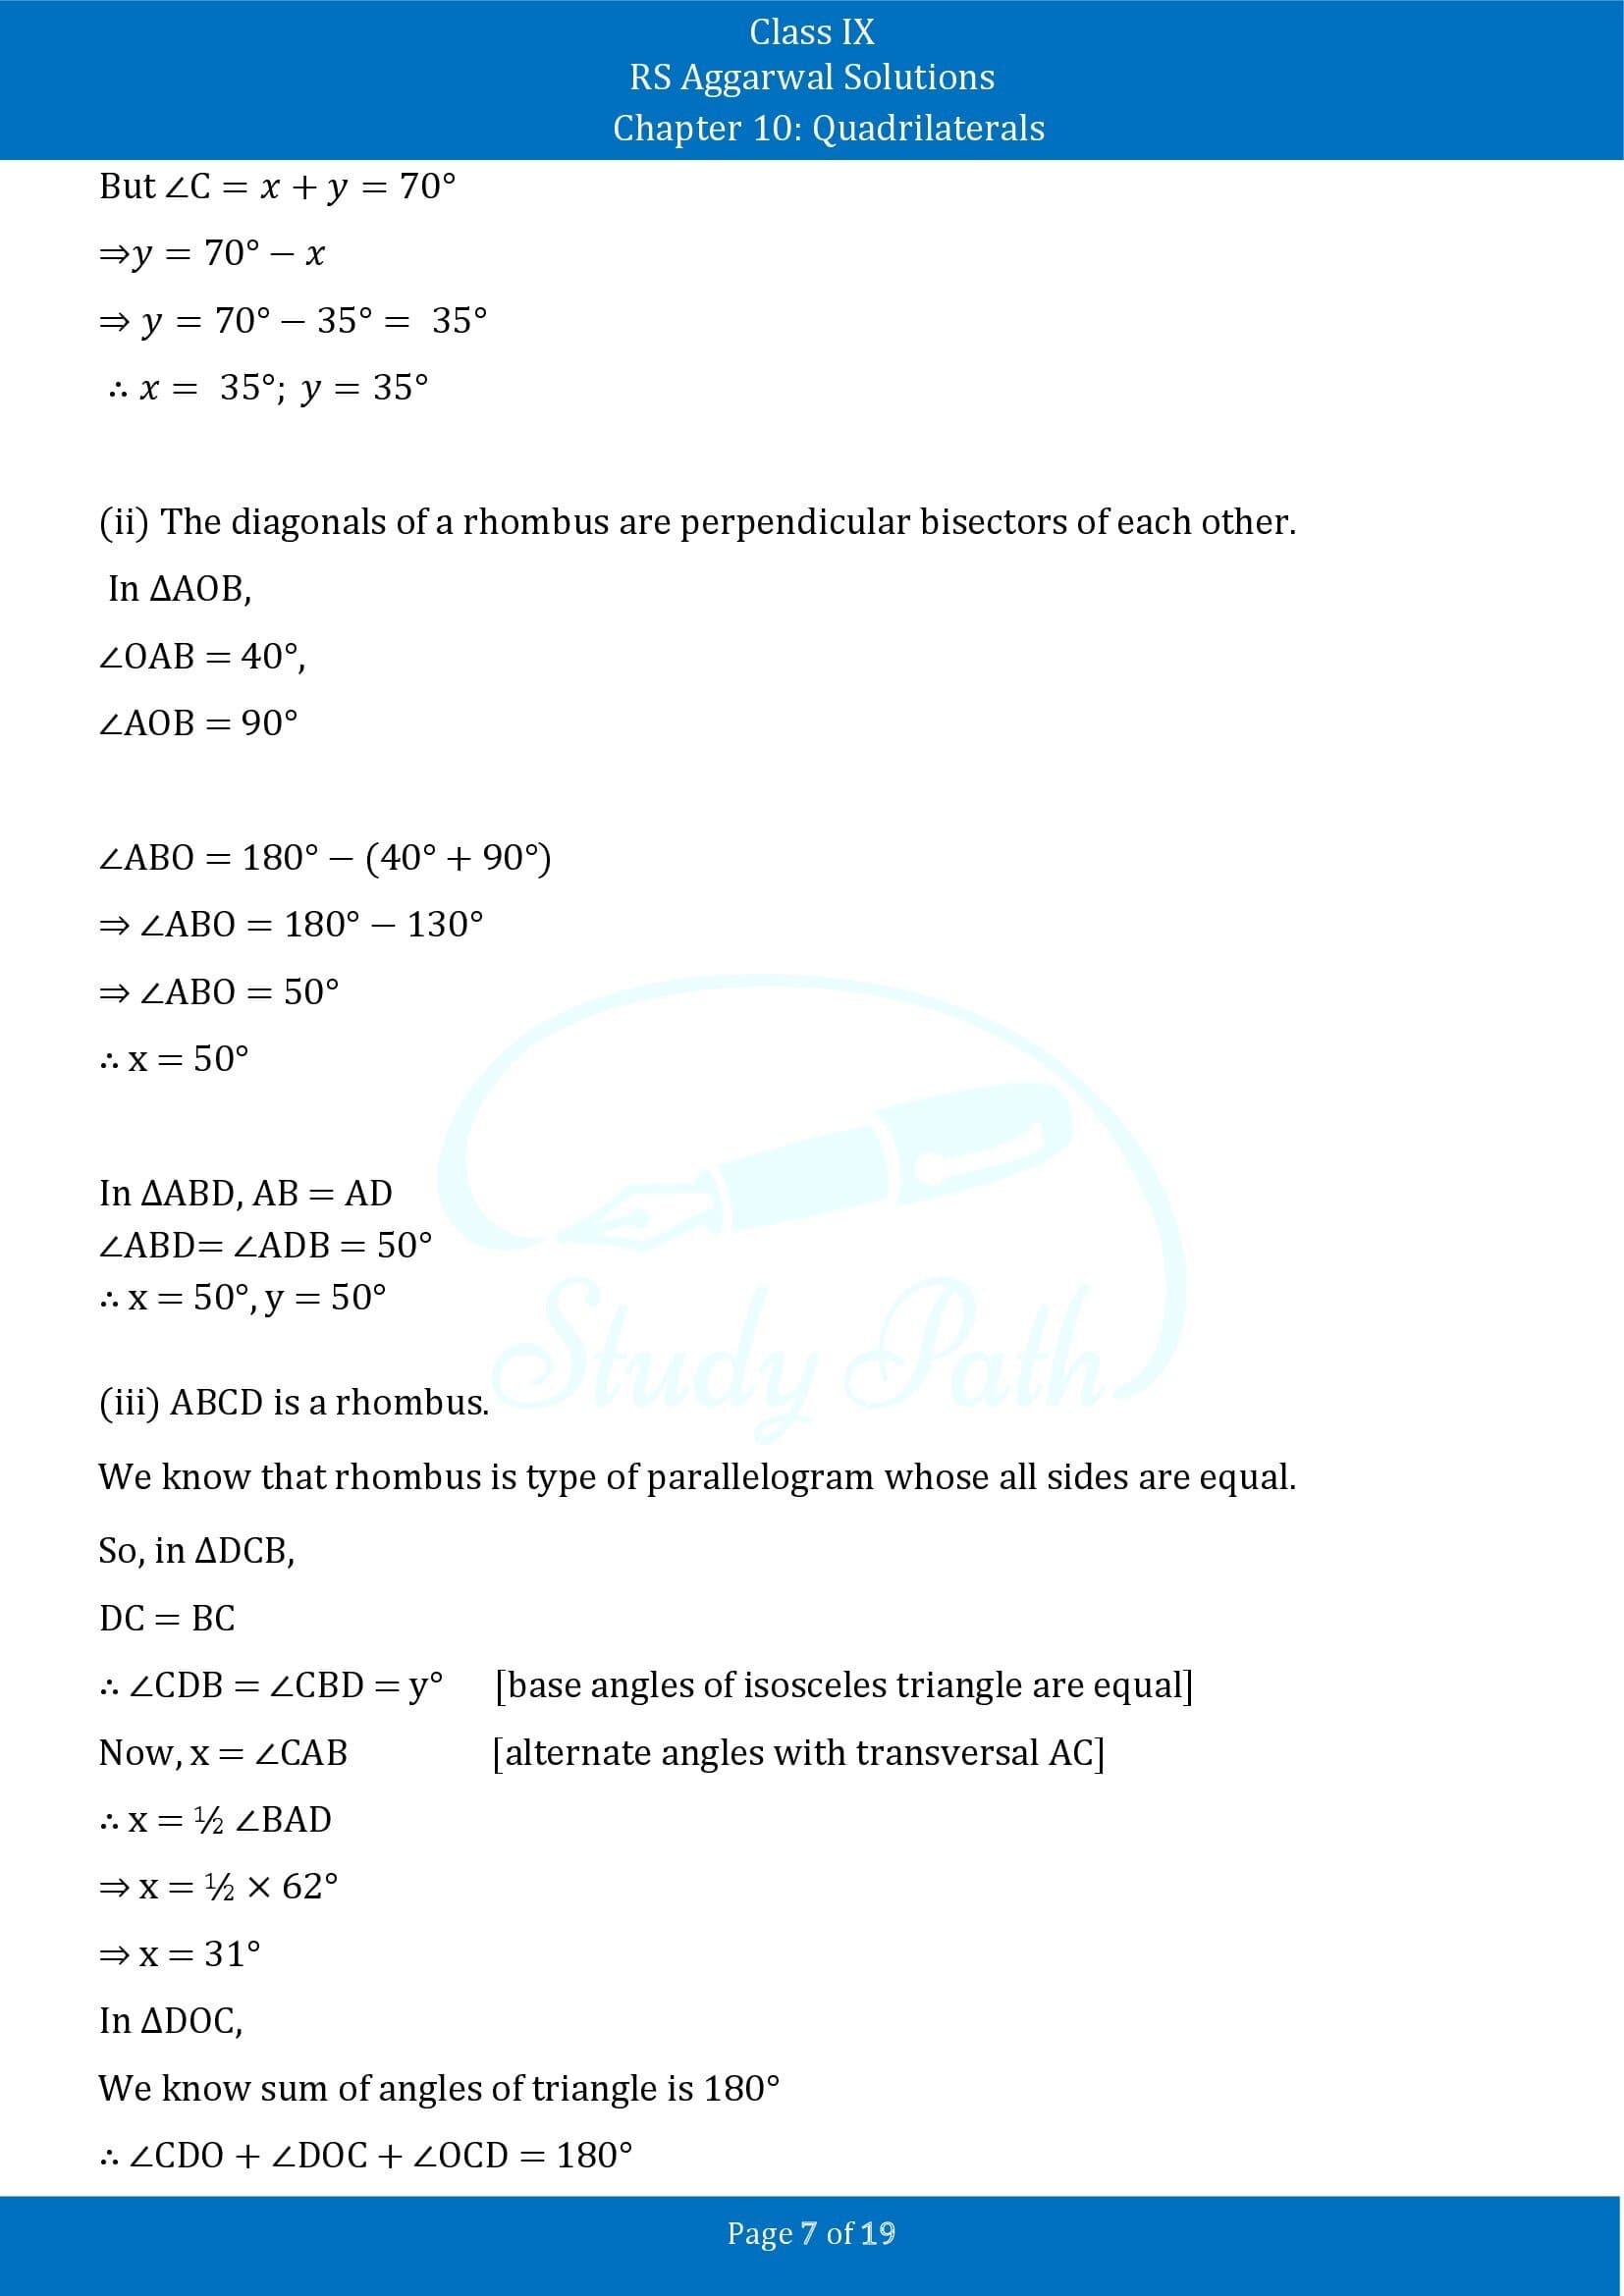 RS Aggarwal Solutions Class 9 Chapter 10 Quadrilaterals Exercise 10B 00007